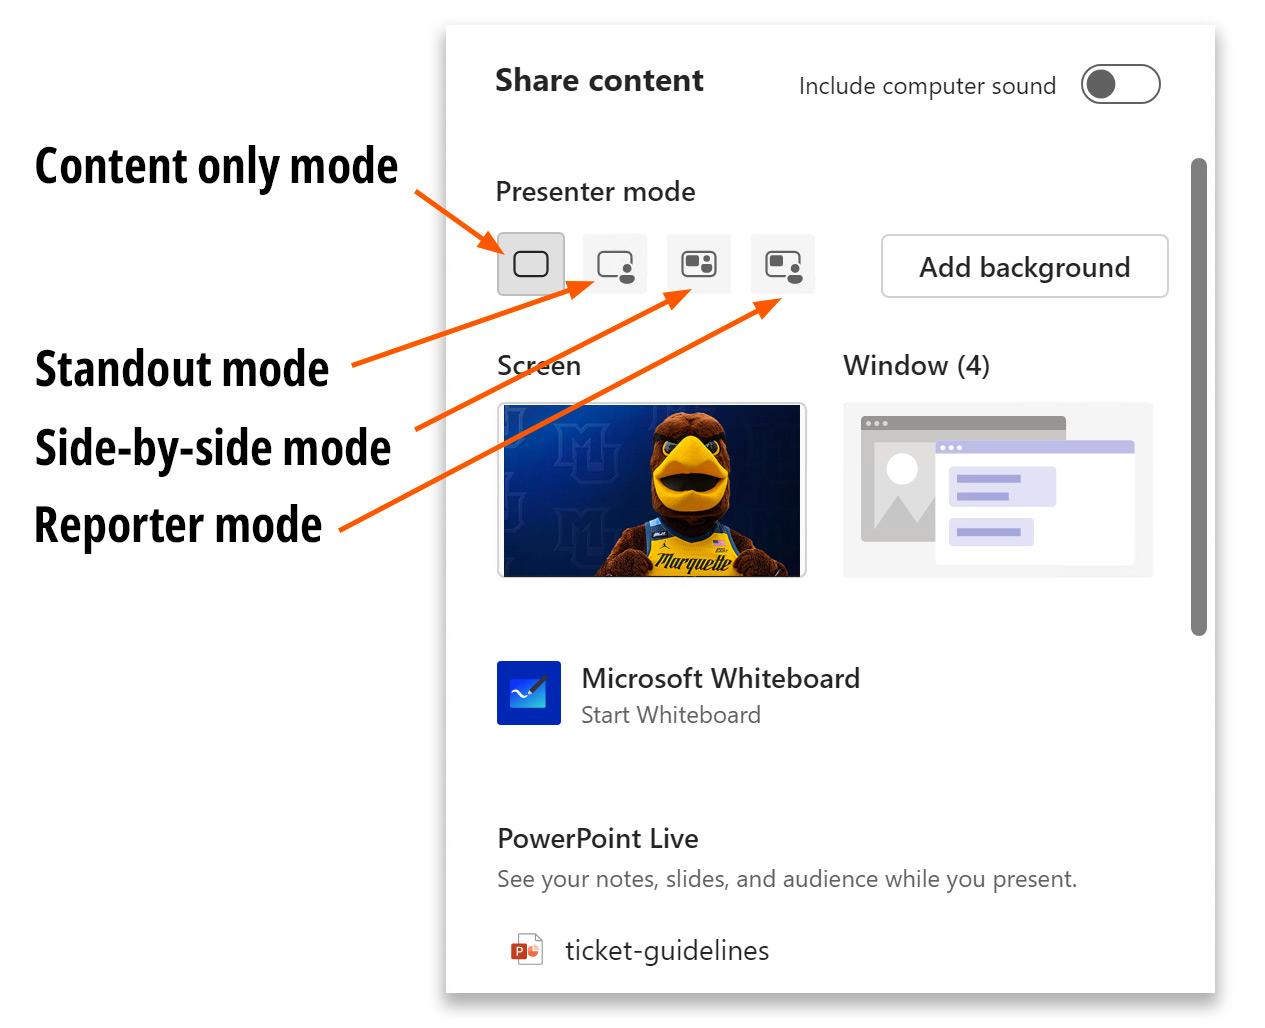 Four modes on the Share content panel